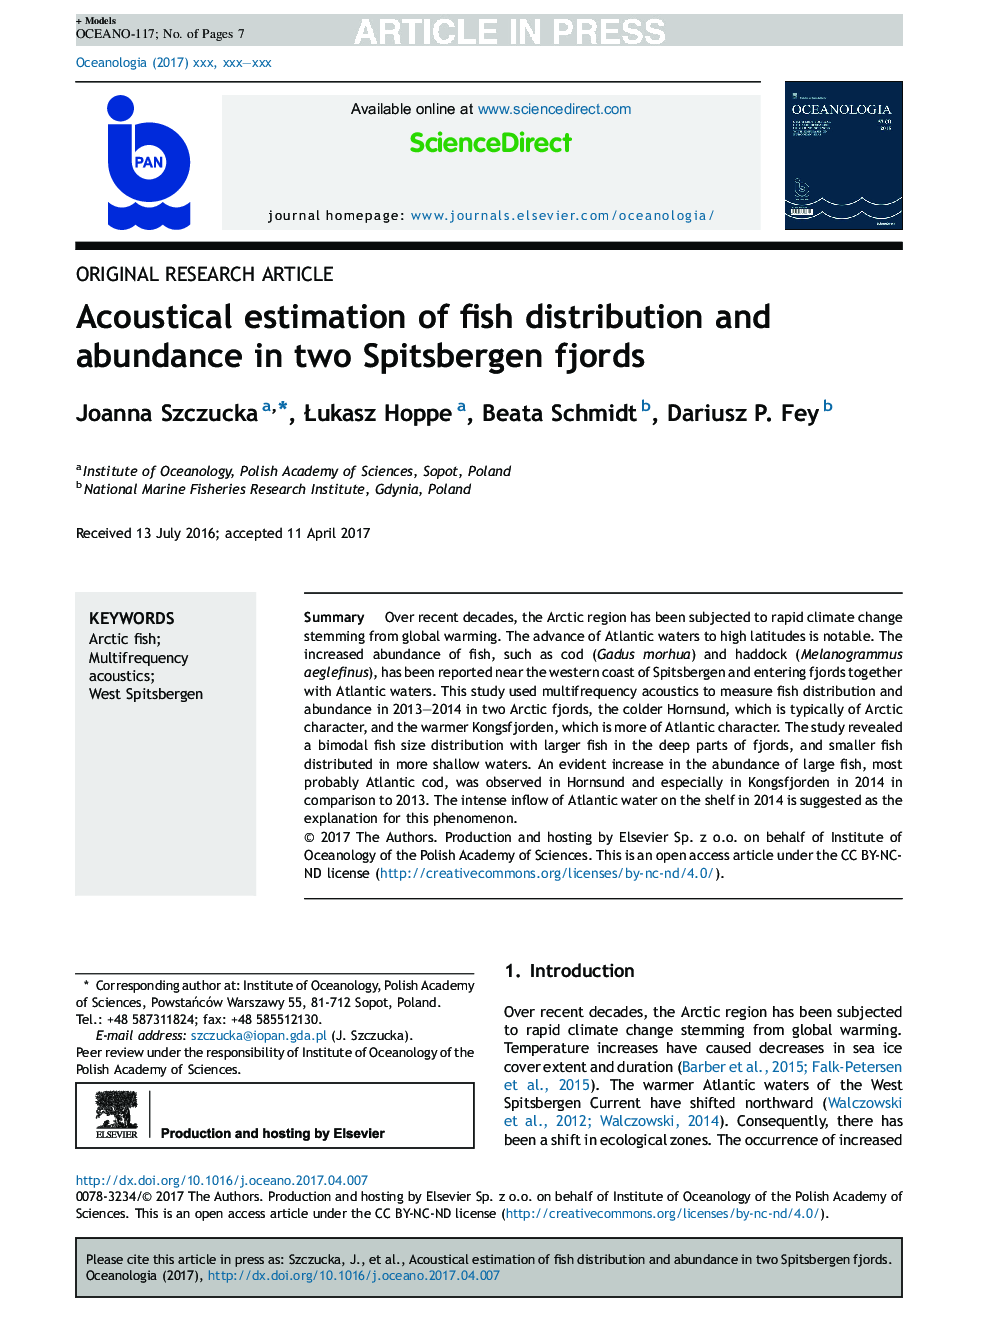 Acoustical estimation of fish distribution and abundance in two Spitsbergen fjords